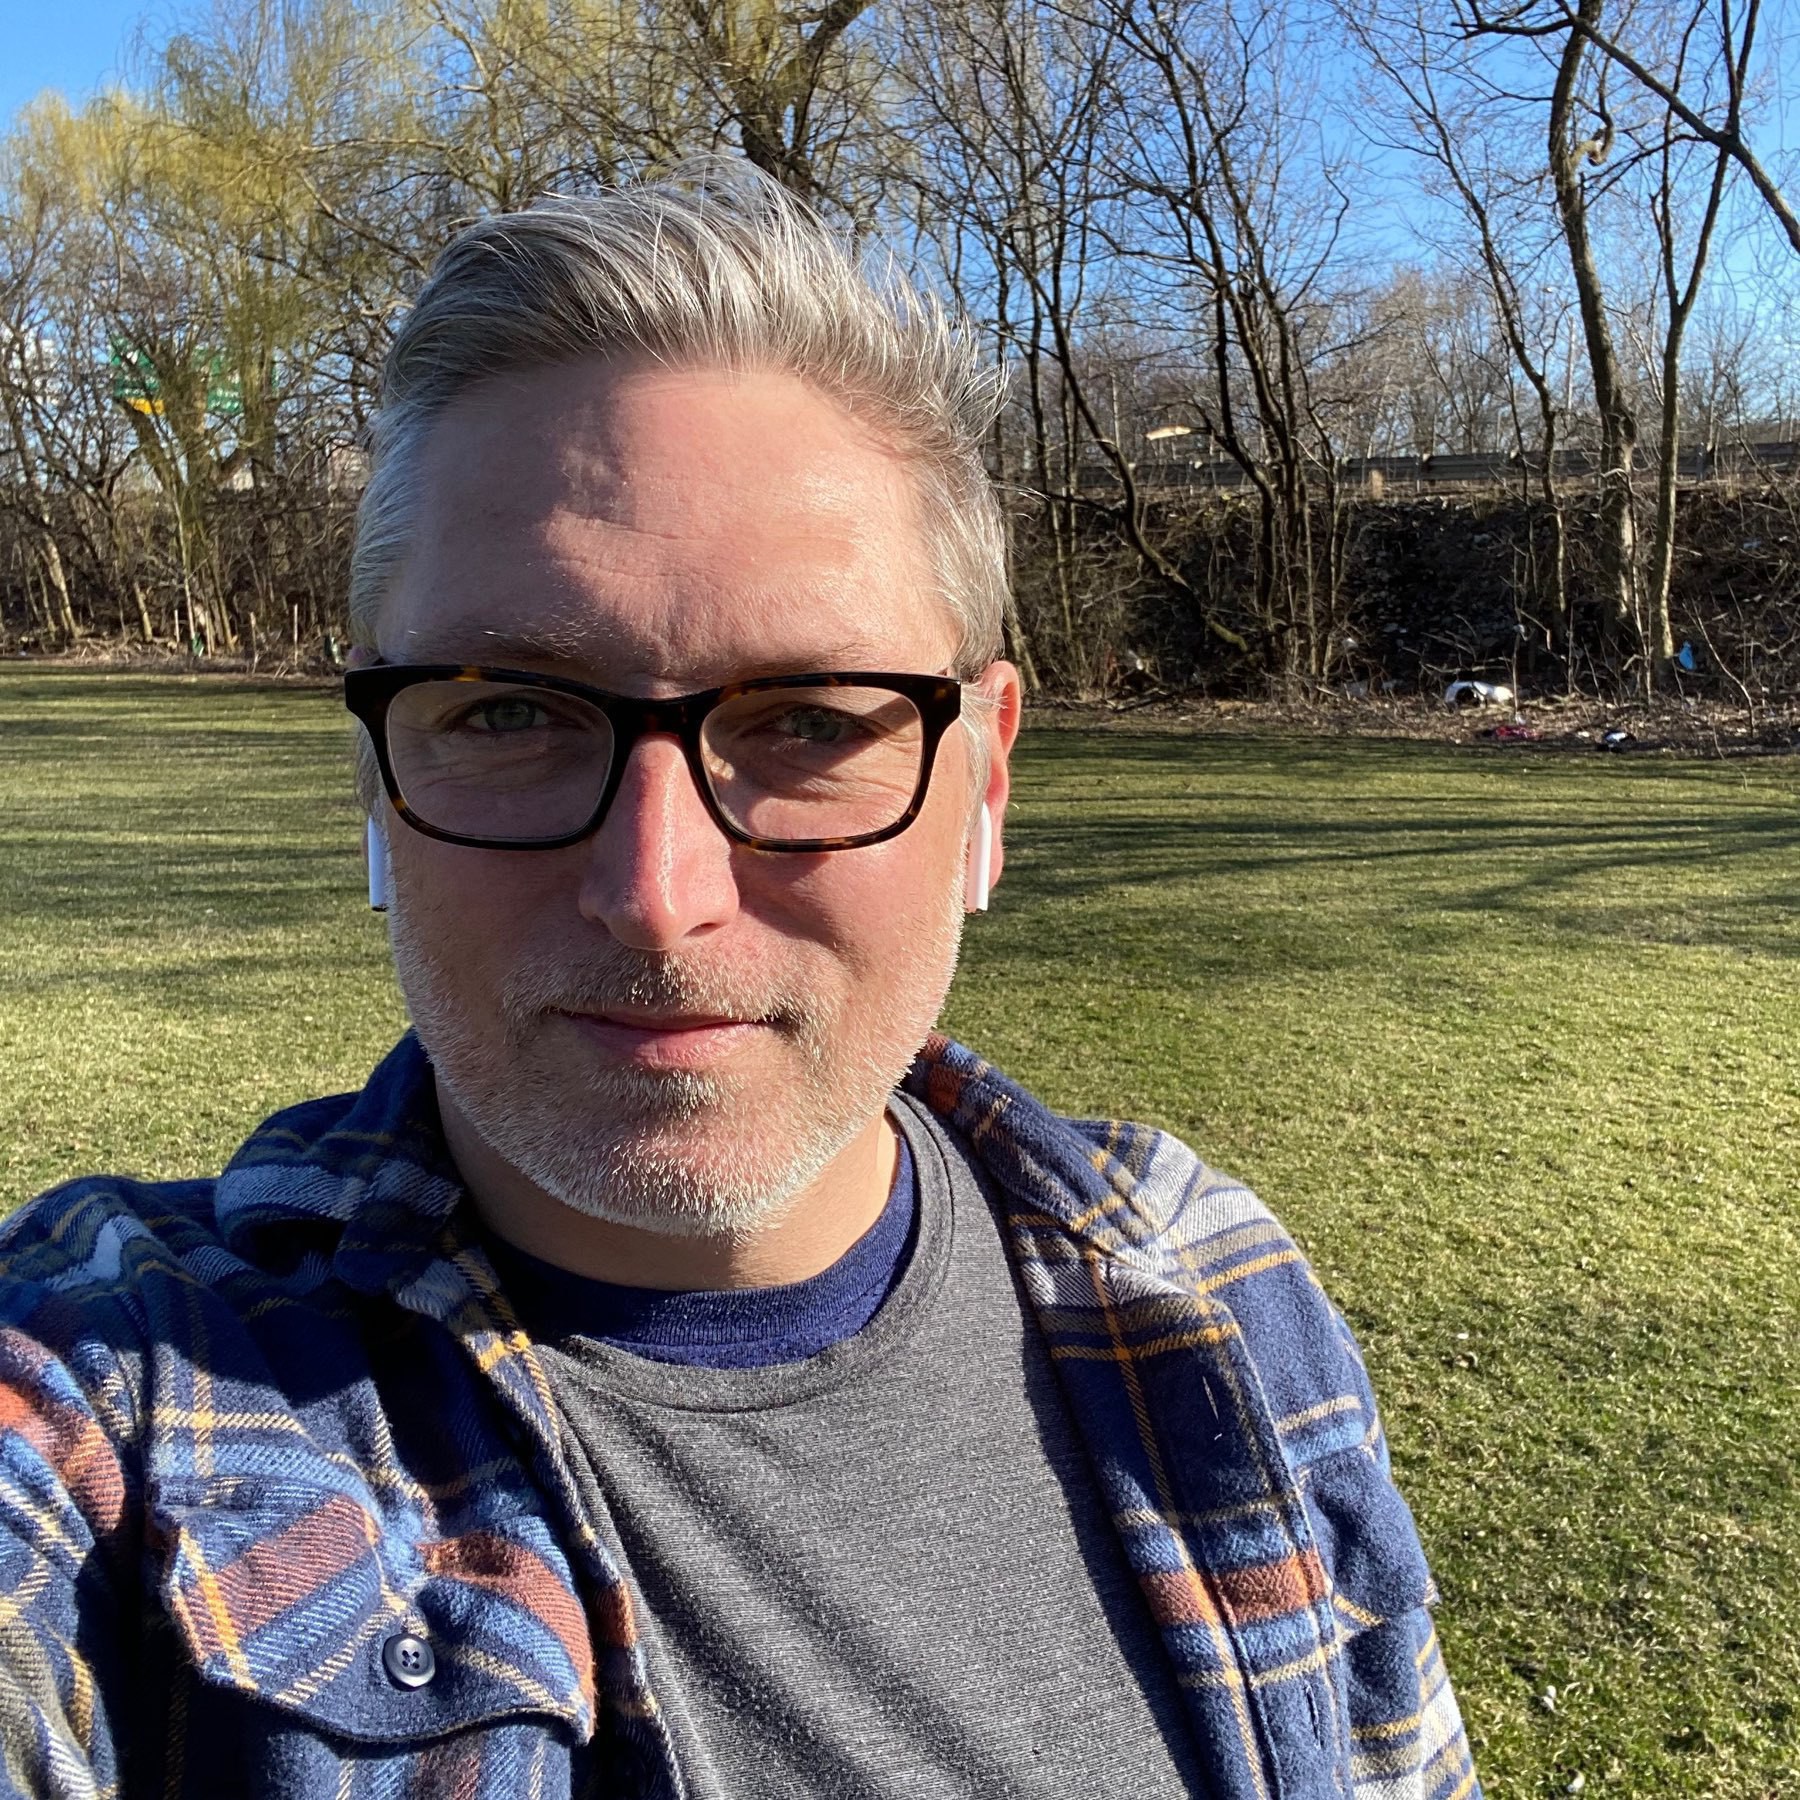 Self portrait against backdrop of green grass and trees.